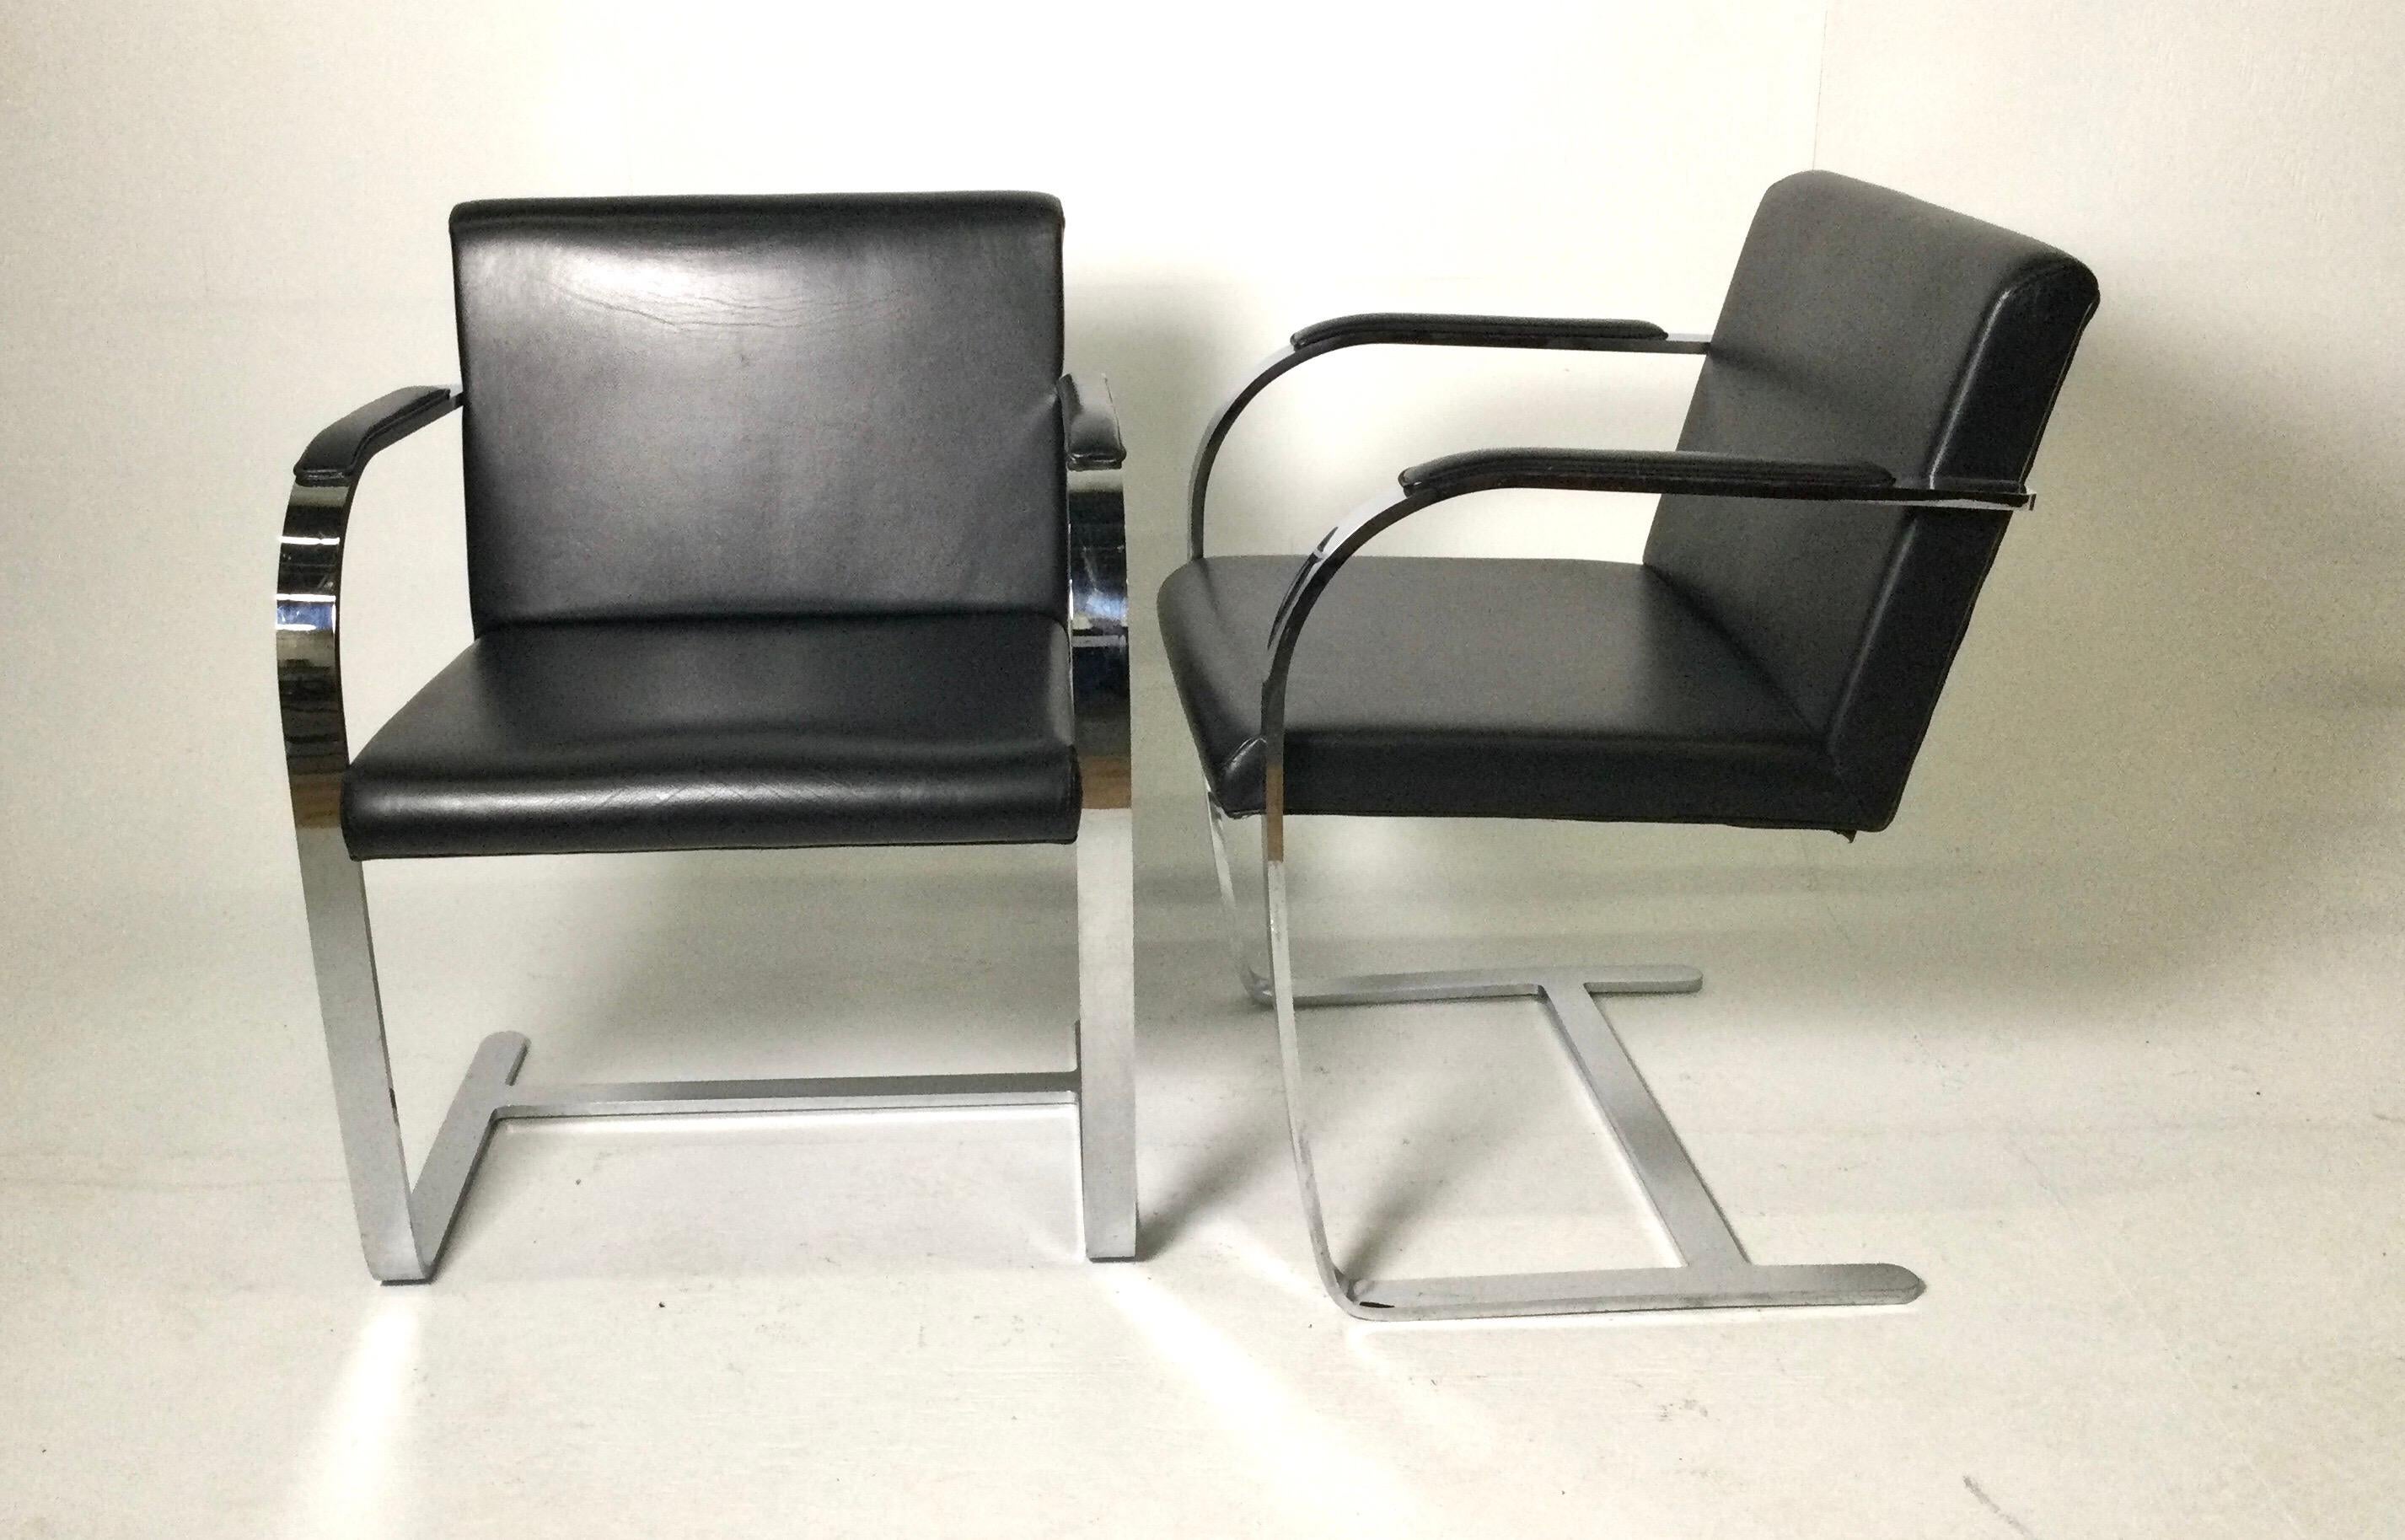 Pair of Knoll Bruno style flat bar chairs with black leather upholstery. Bought in the D & D building in NYC in the early 1980's. No Knoll markings but heavy. Very comfy. Very minor age appropriate wear from use.